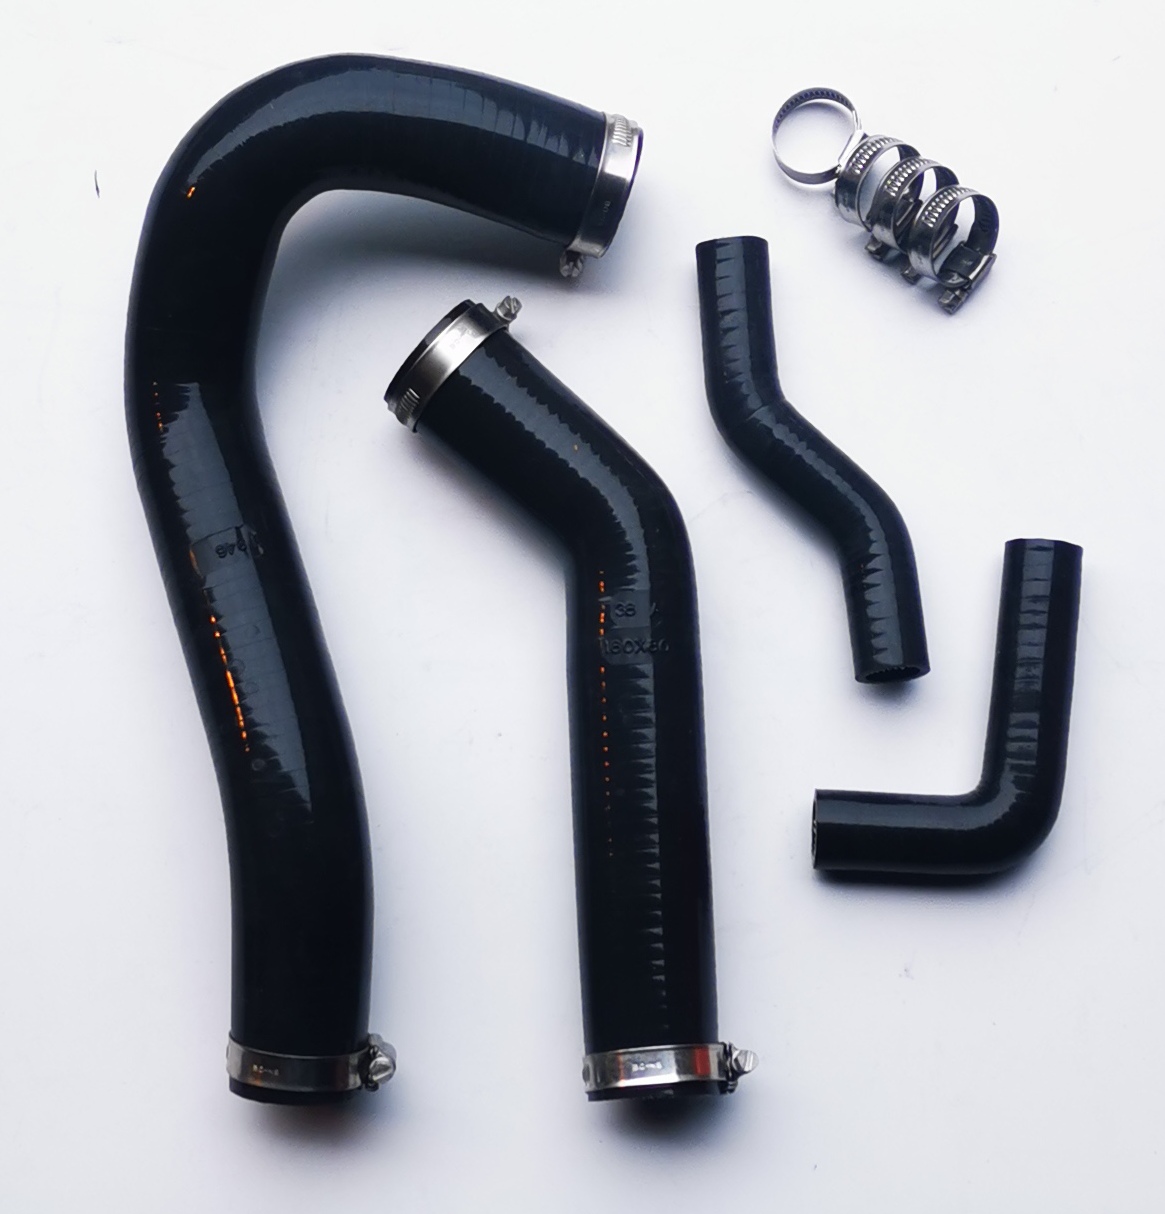 Silicone hose kits other models